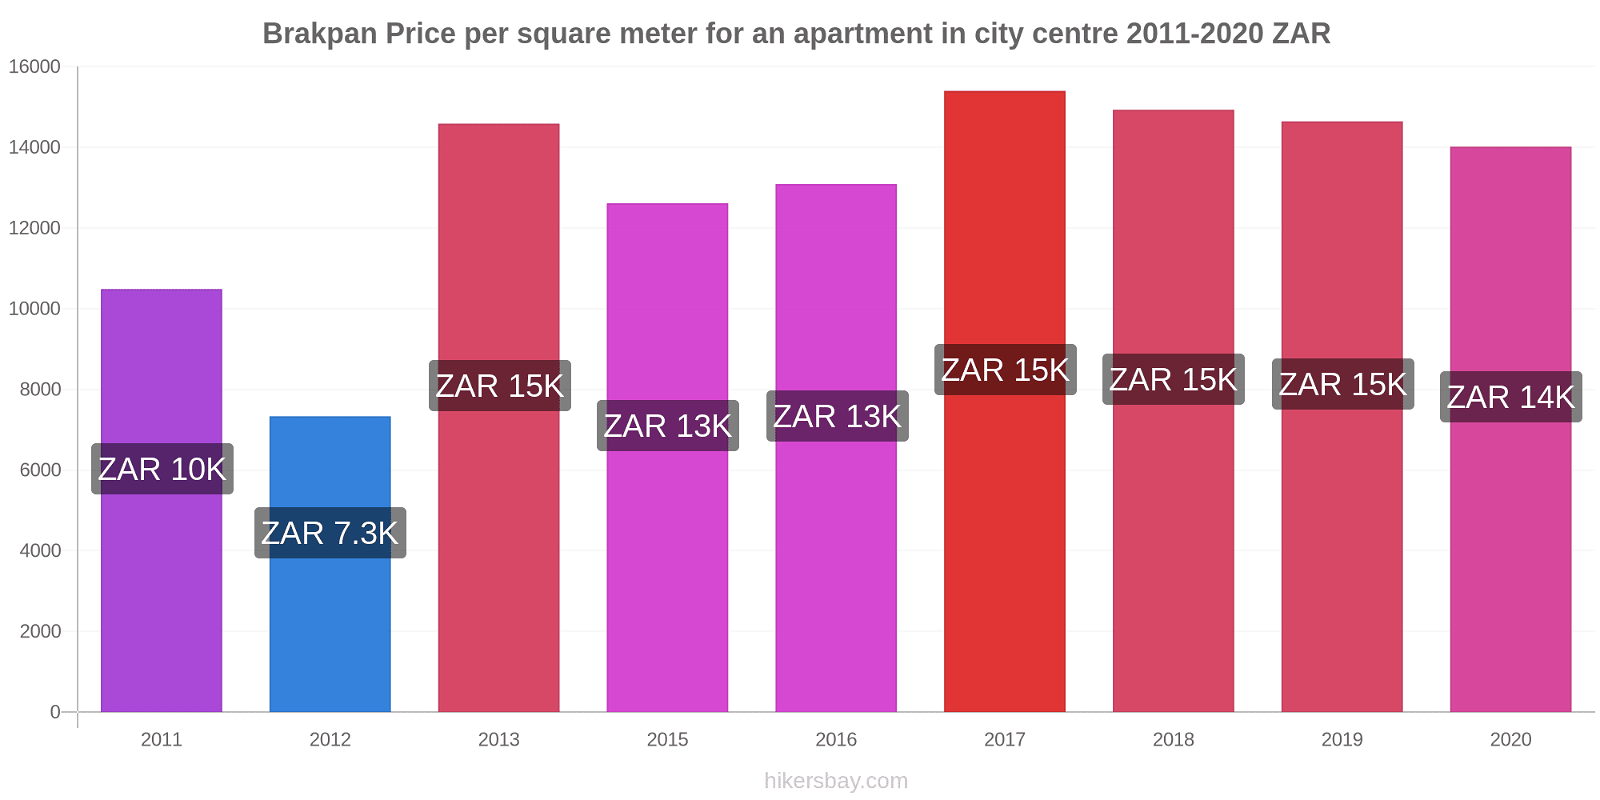 Brakpan price changes Price per square meter for an apartment in city centre hikersbay.com